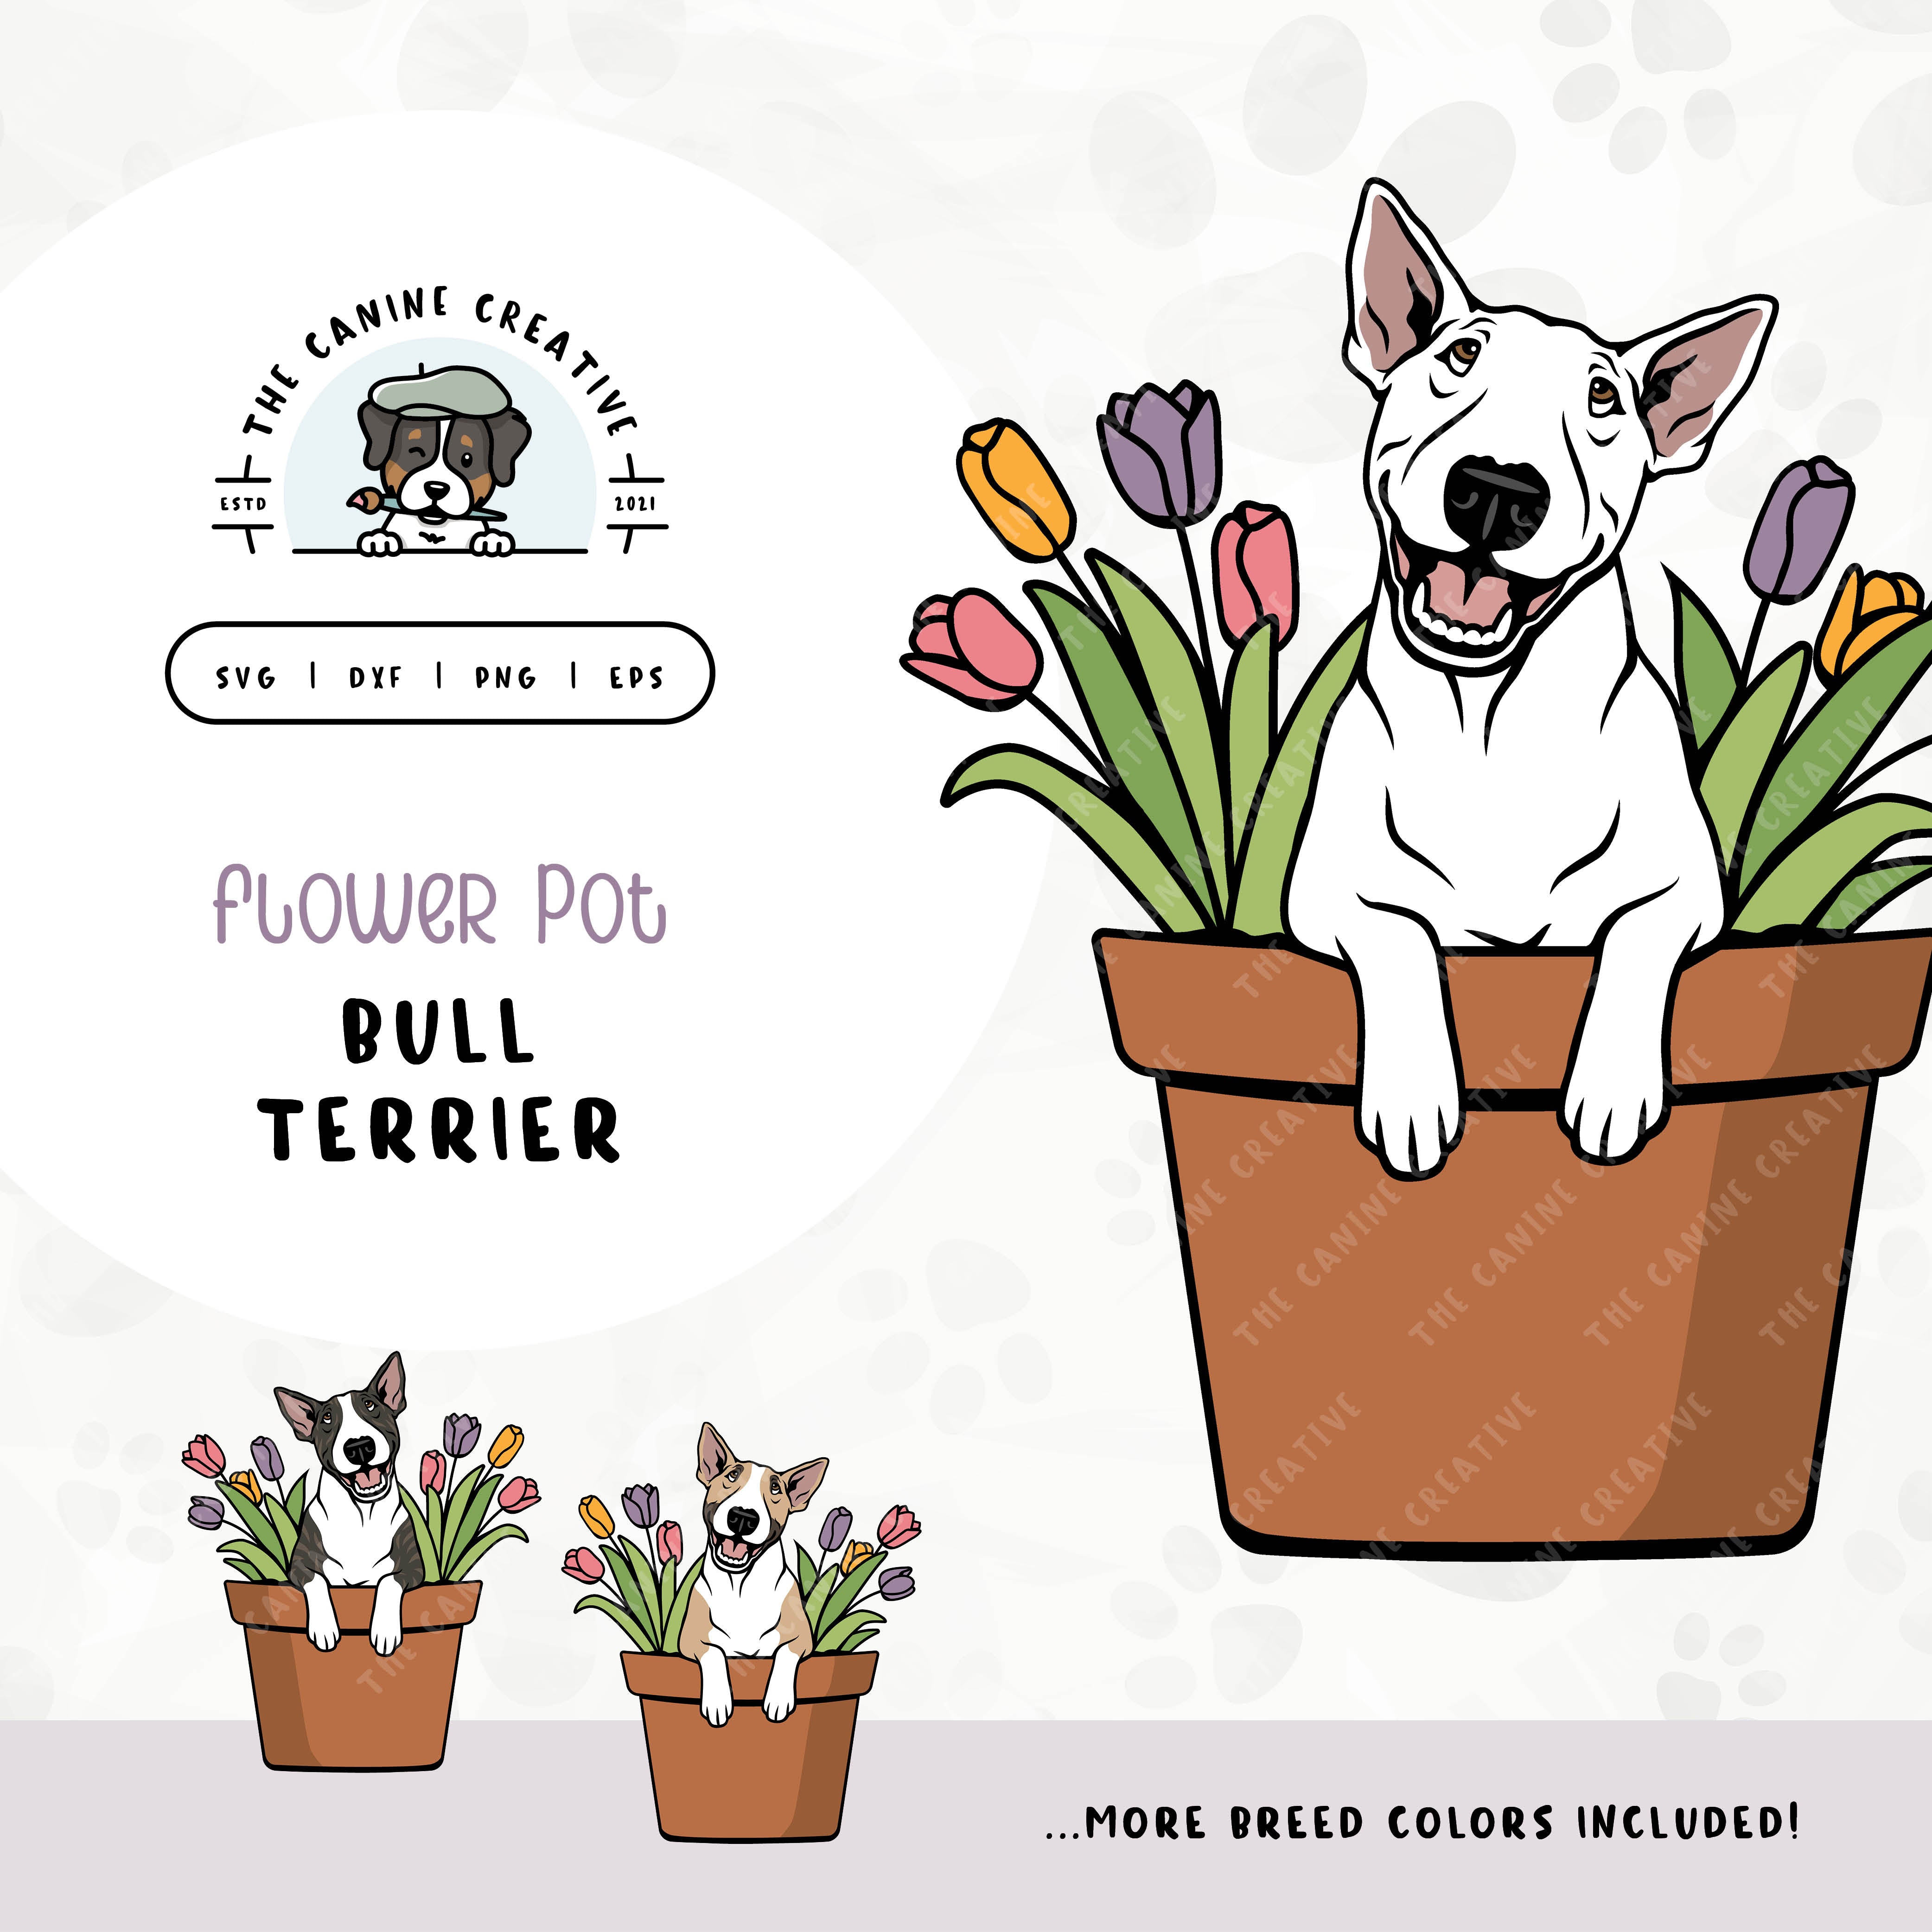 This springtime illustration features a Bull Terrier peeking out of a pot of vibrant tulips. File formats include: SVG, DXF, PNG, and EPS.